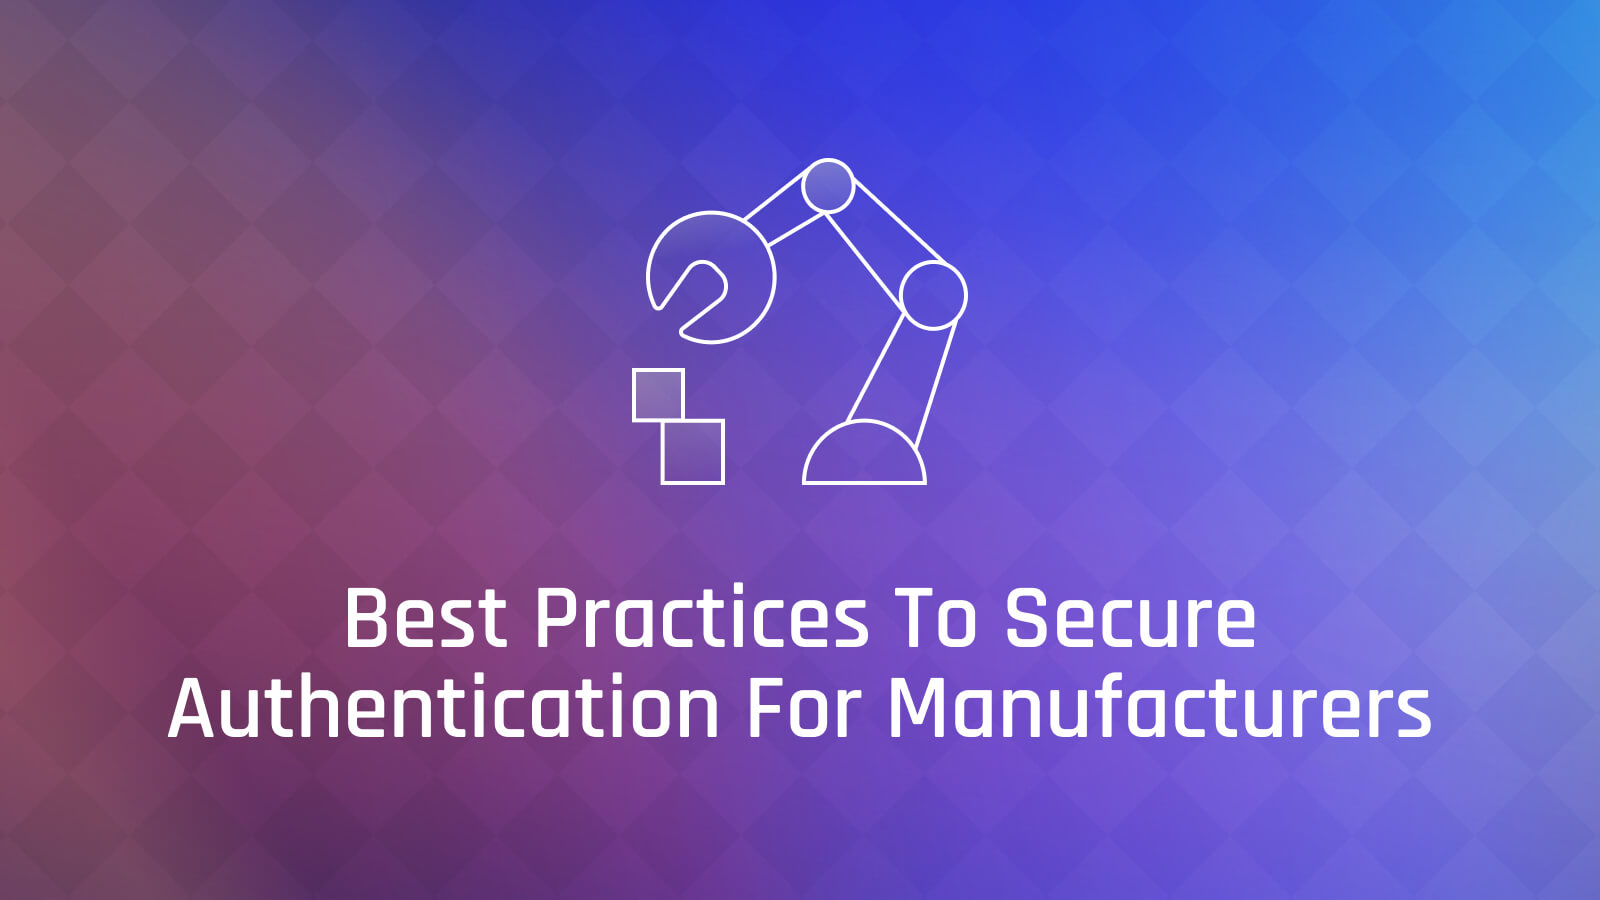 Authentication Security Best Practices in the Manufacturing Industry